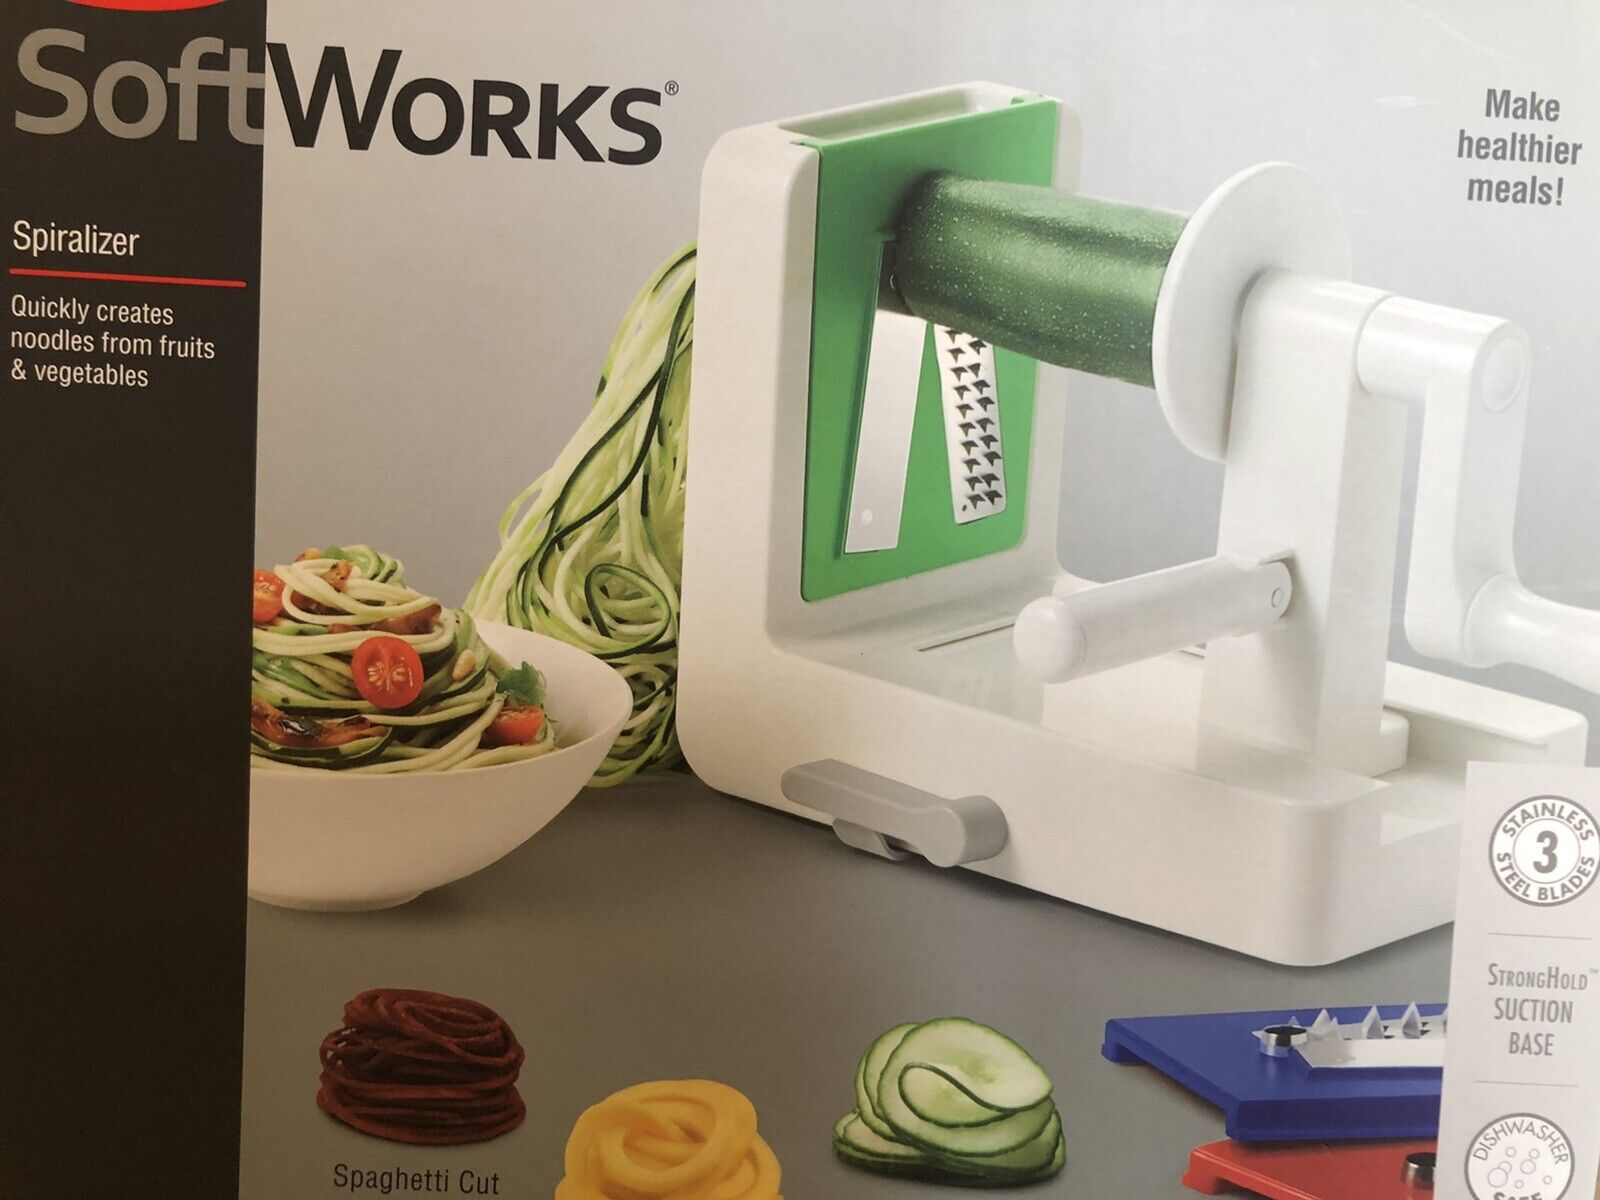 Oxo Softworks Spiralizer Quickly Creates Noodles From Fruits & Vegetables, 21134